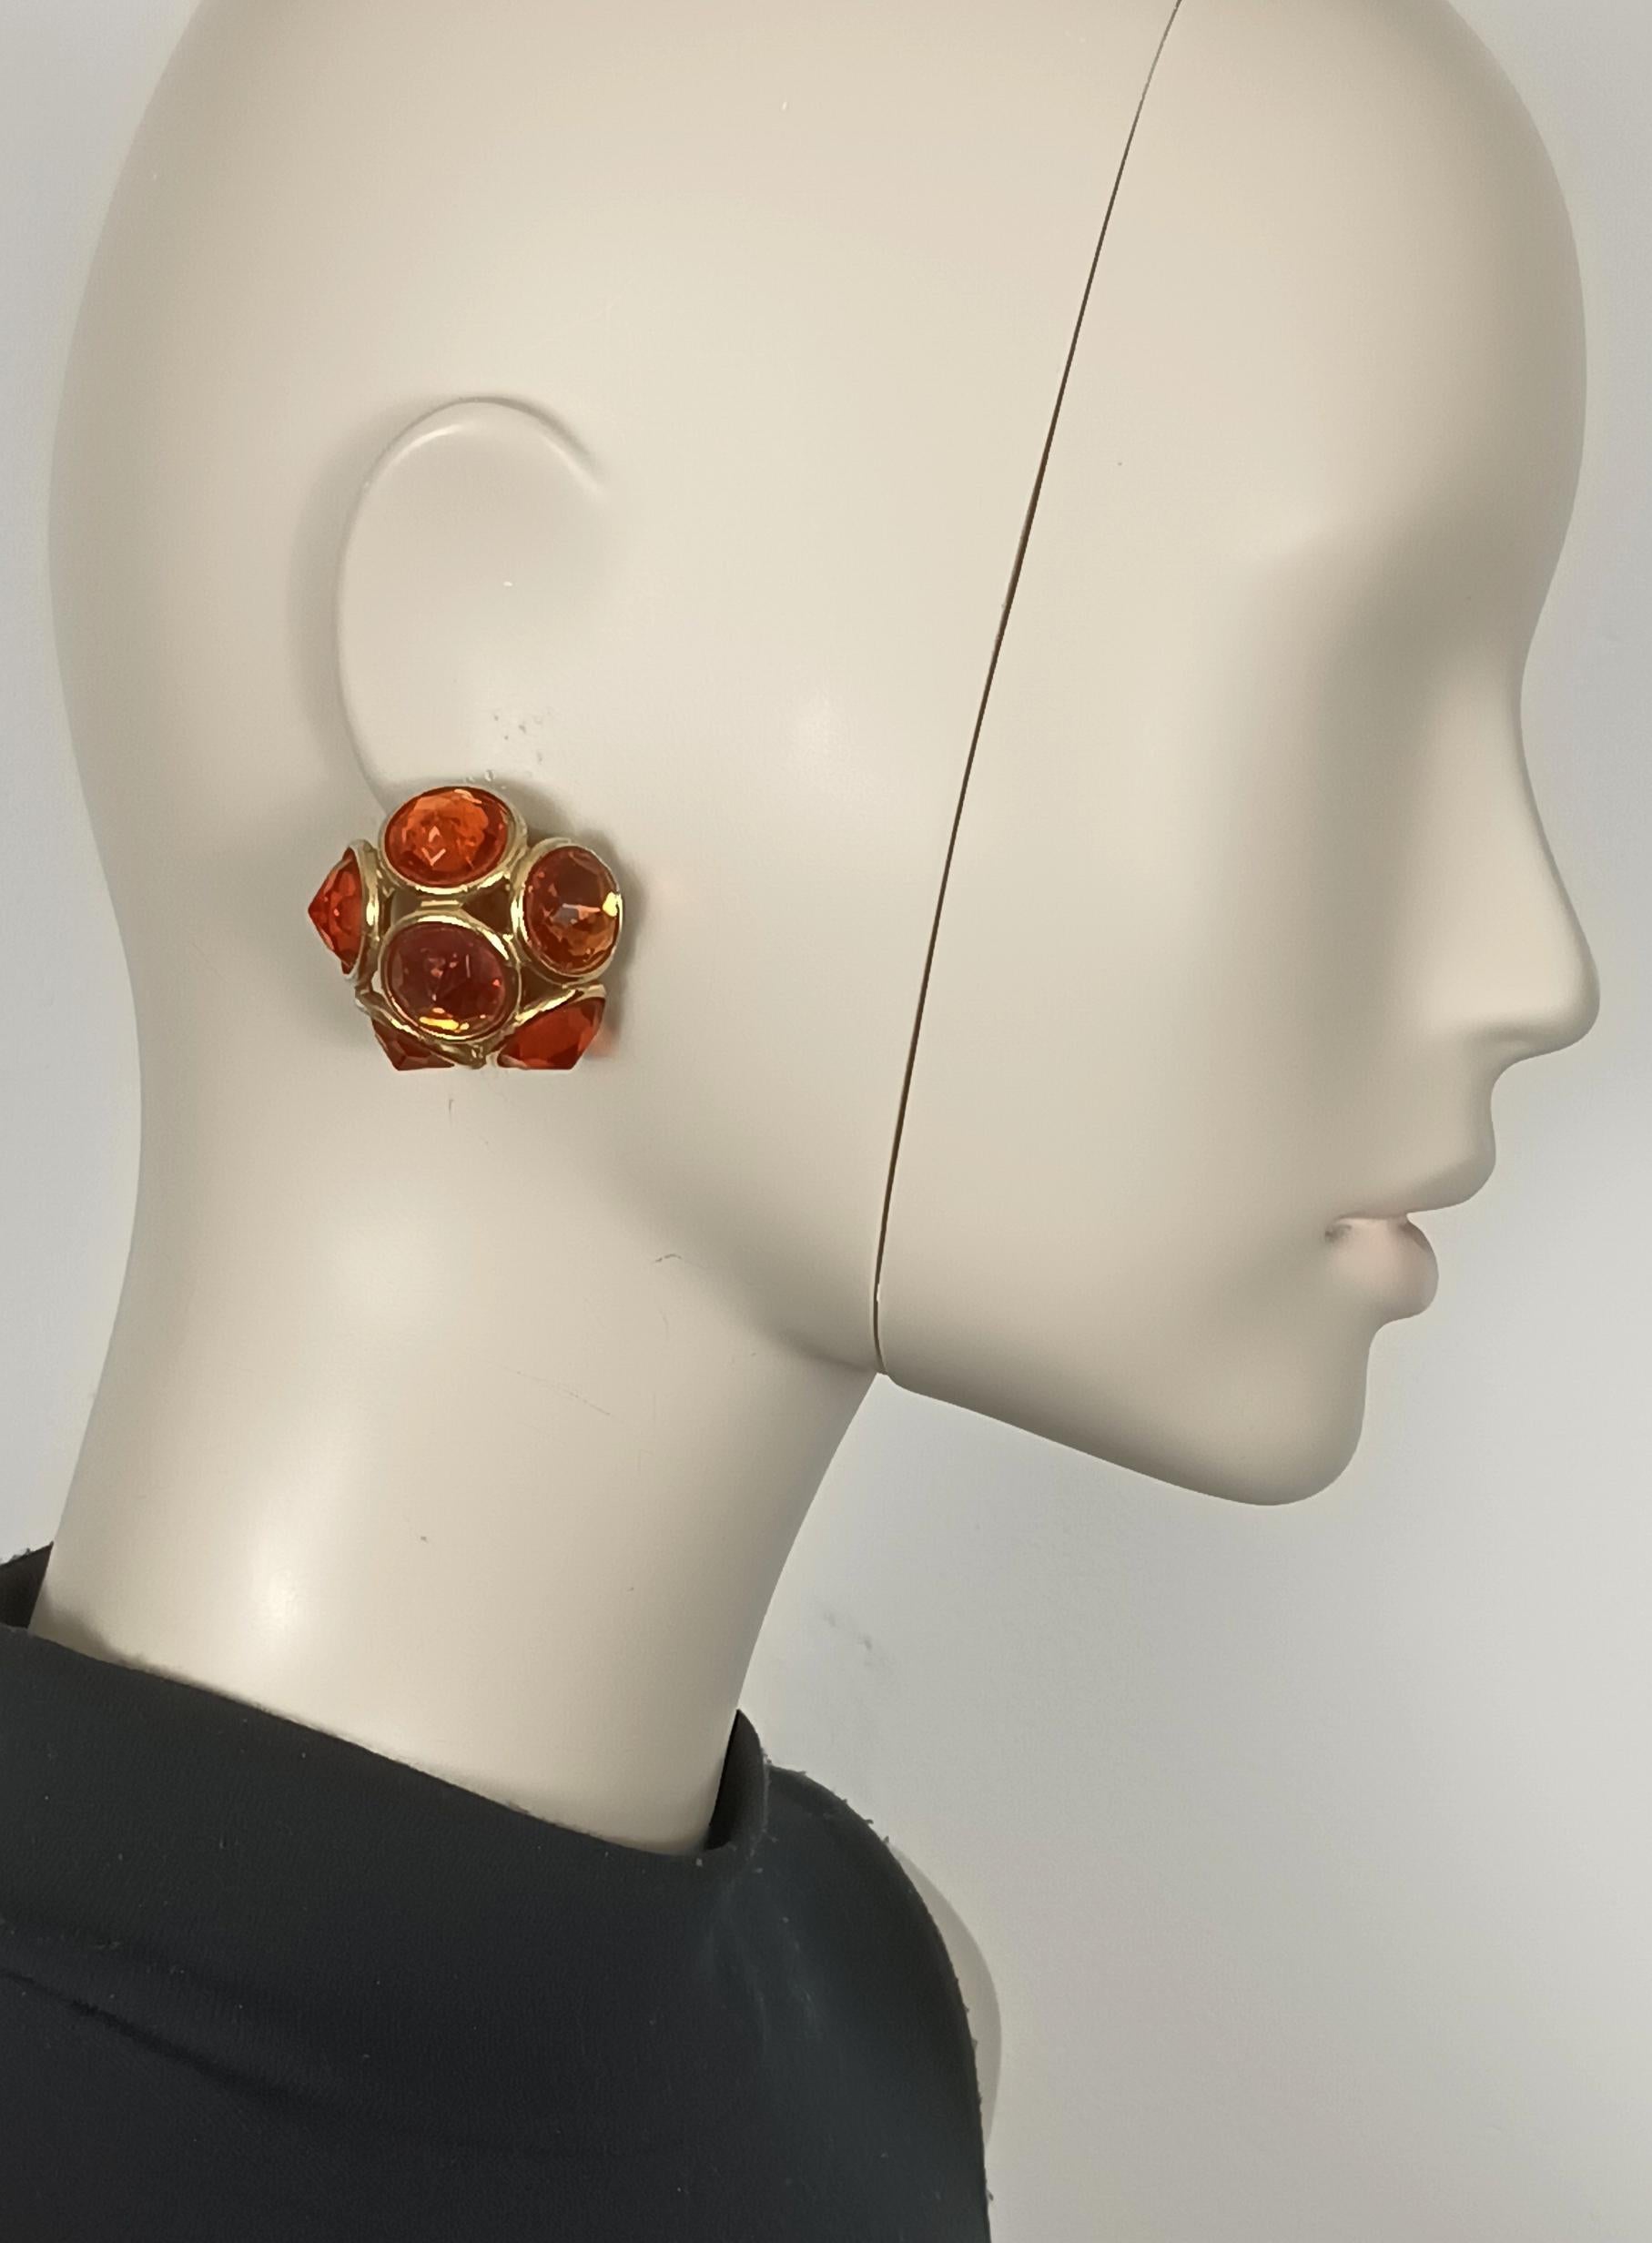 YVES SAINT LAURENT vintage gold tone clip-on earrings embellished with resin faceted stones in orange color forming a dome shape.

Embossed YSL Made in France.

Indicative measurements : max. 3.3 cm x max. 3.3 cm (1.30 inches x 1.30 inches).

Weight